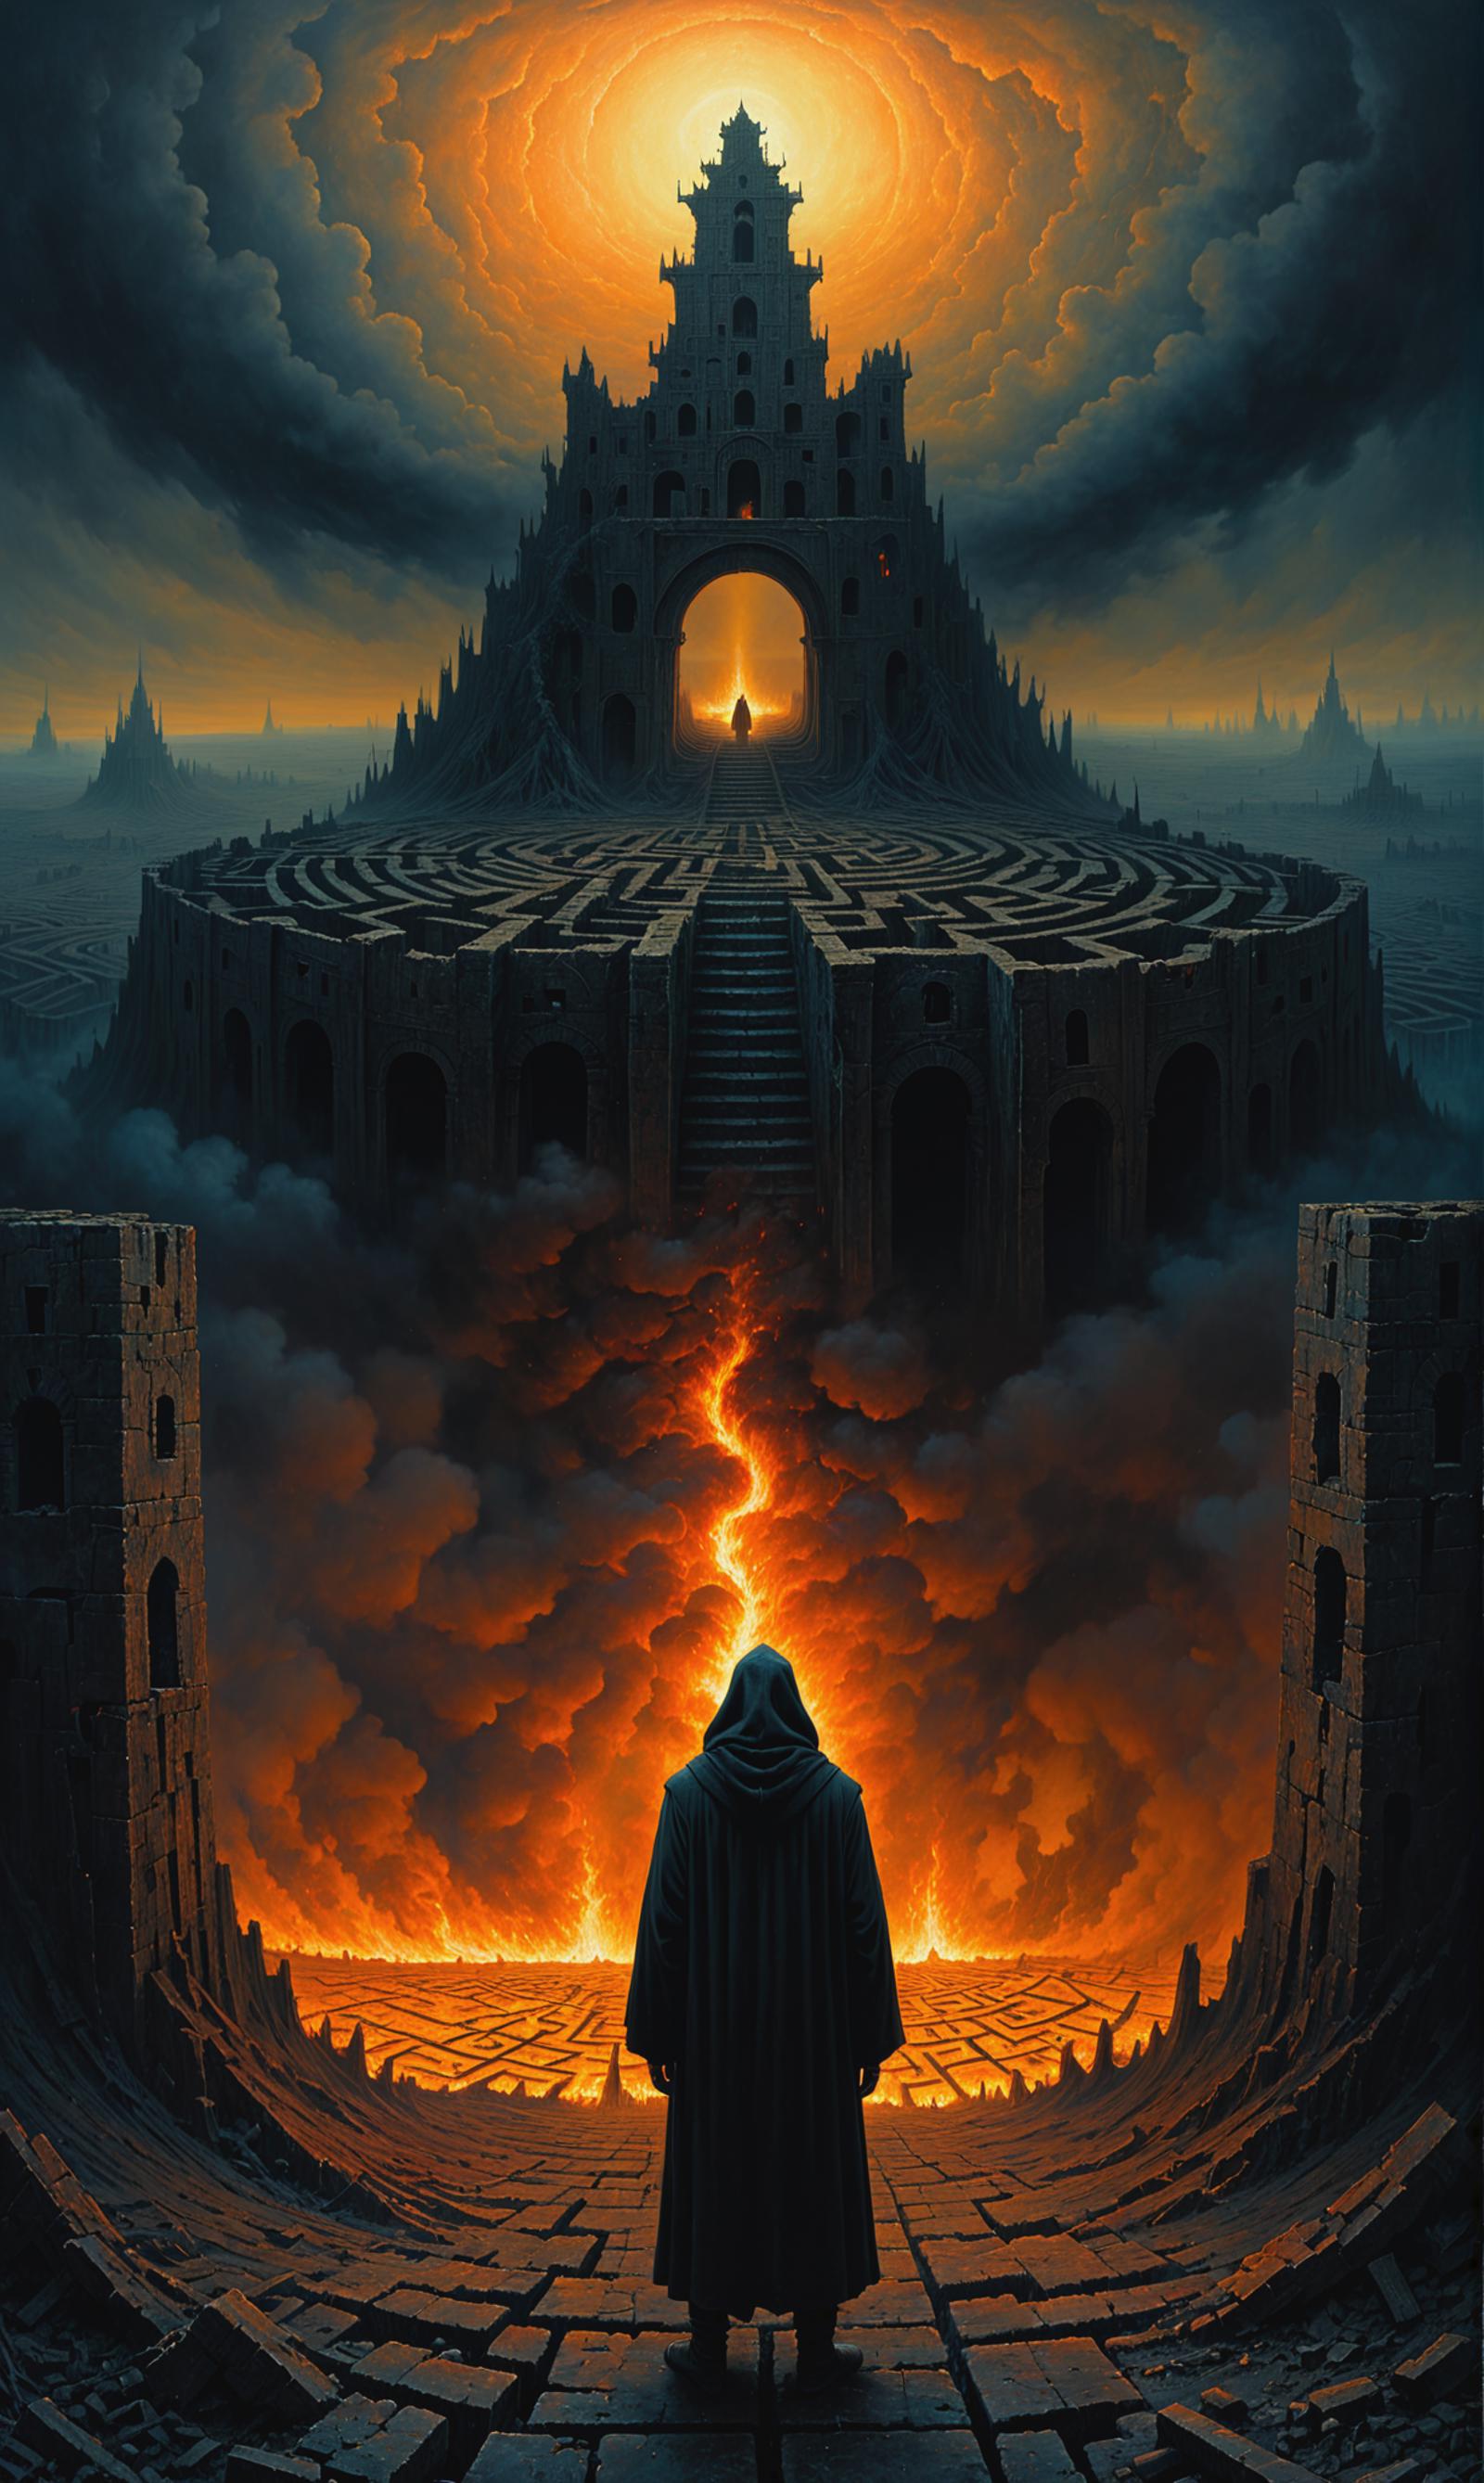 A person in a hooded robe looking at a fiery abyss in a fantasy painting.